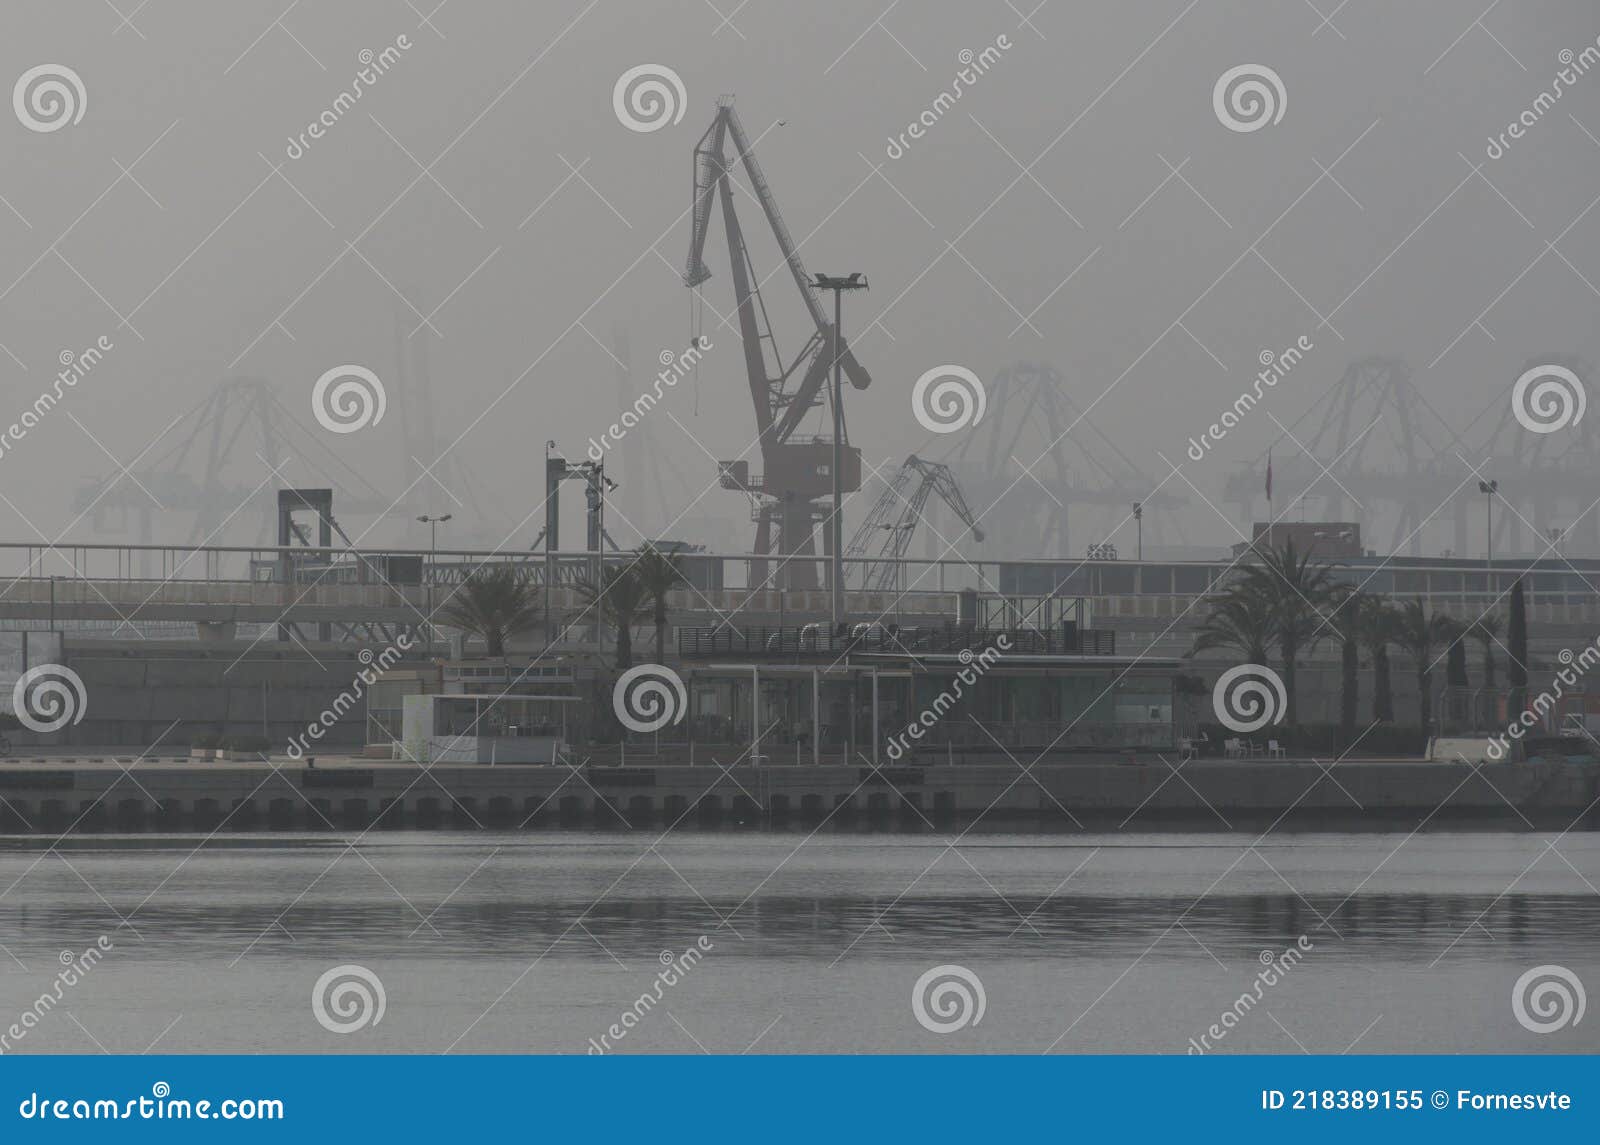 harbor with mist and cranes